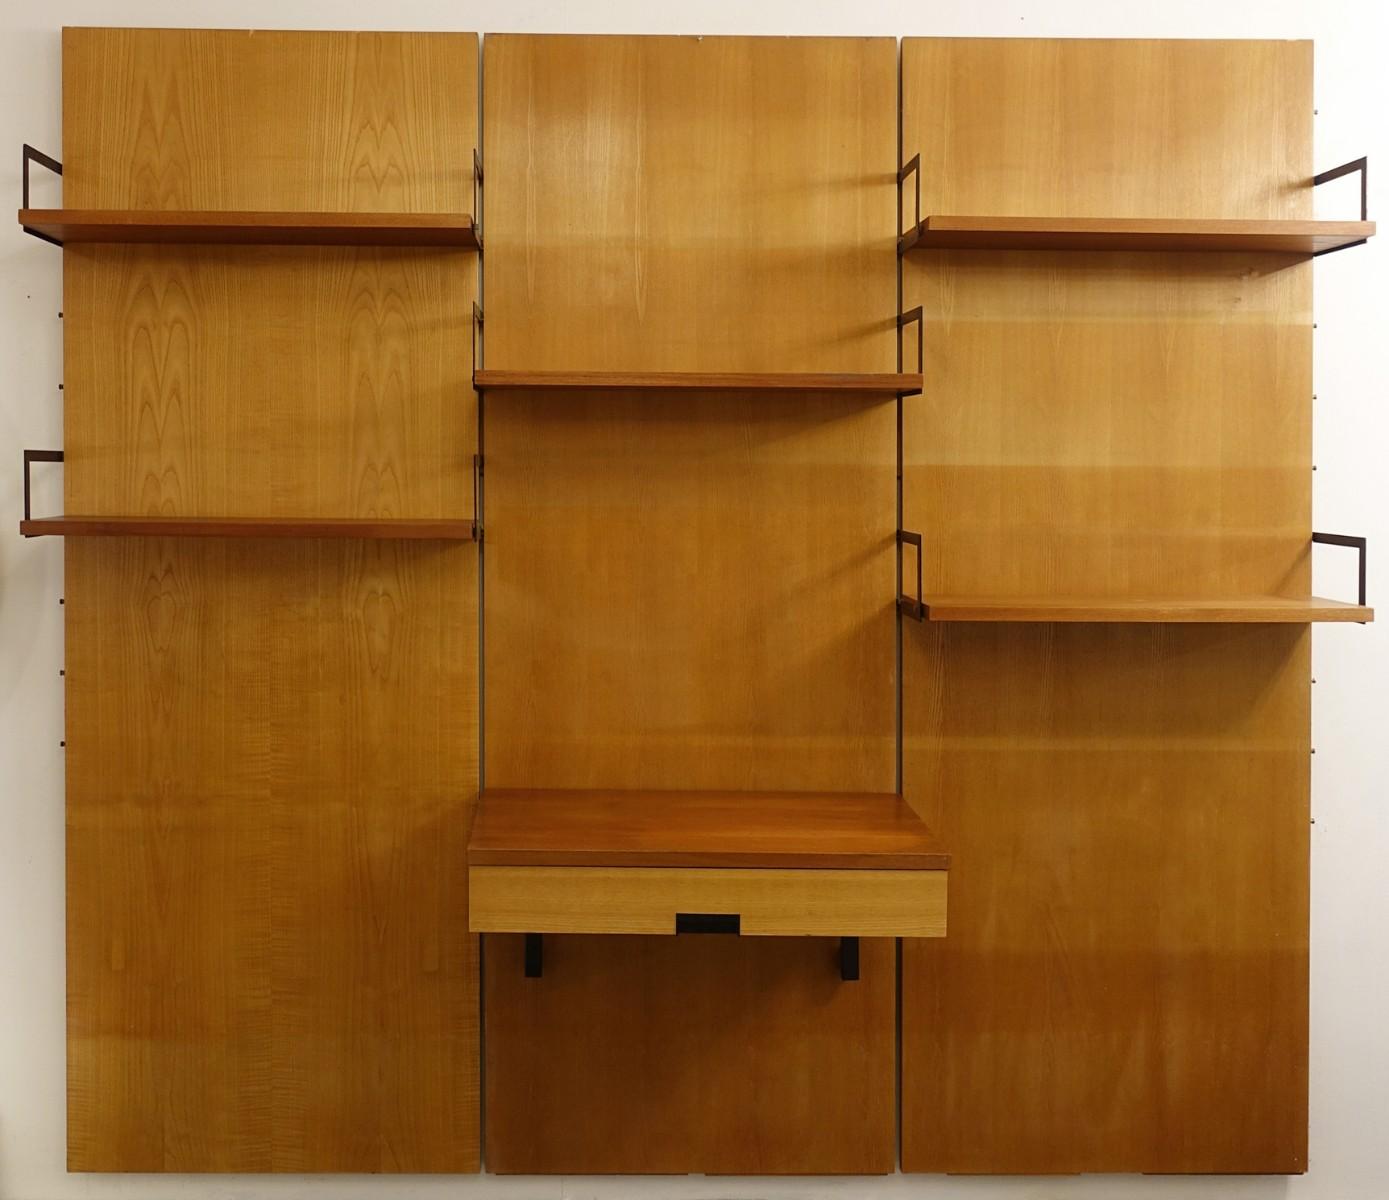 Japanese Serie modular wall unit by Cees Braakman for Ums-Pastoe.
 